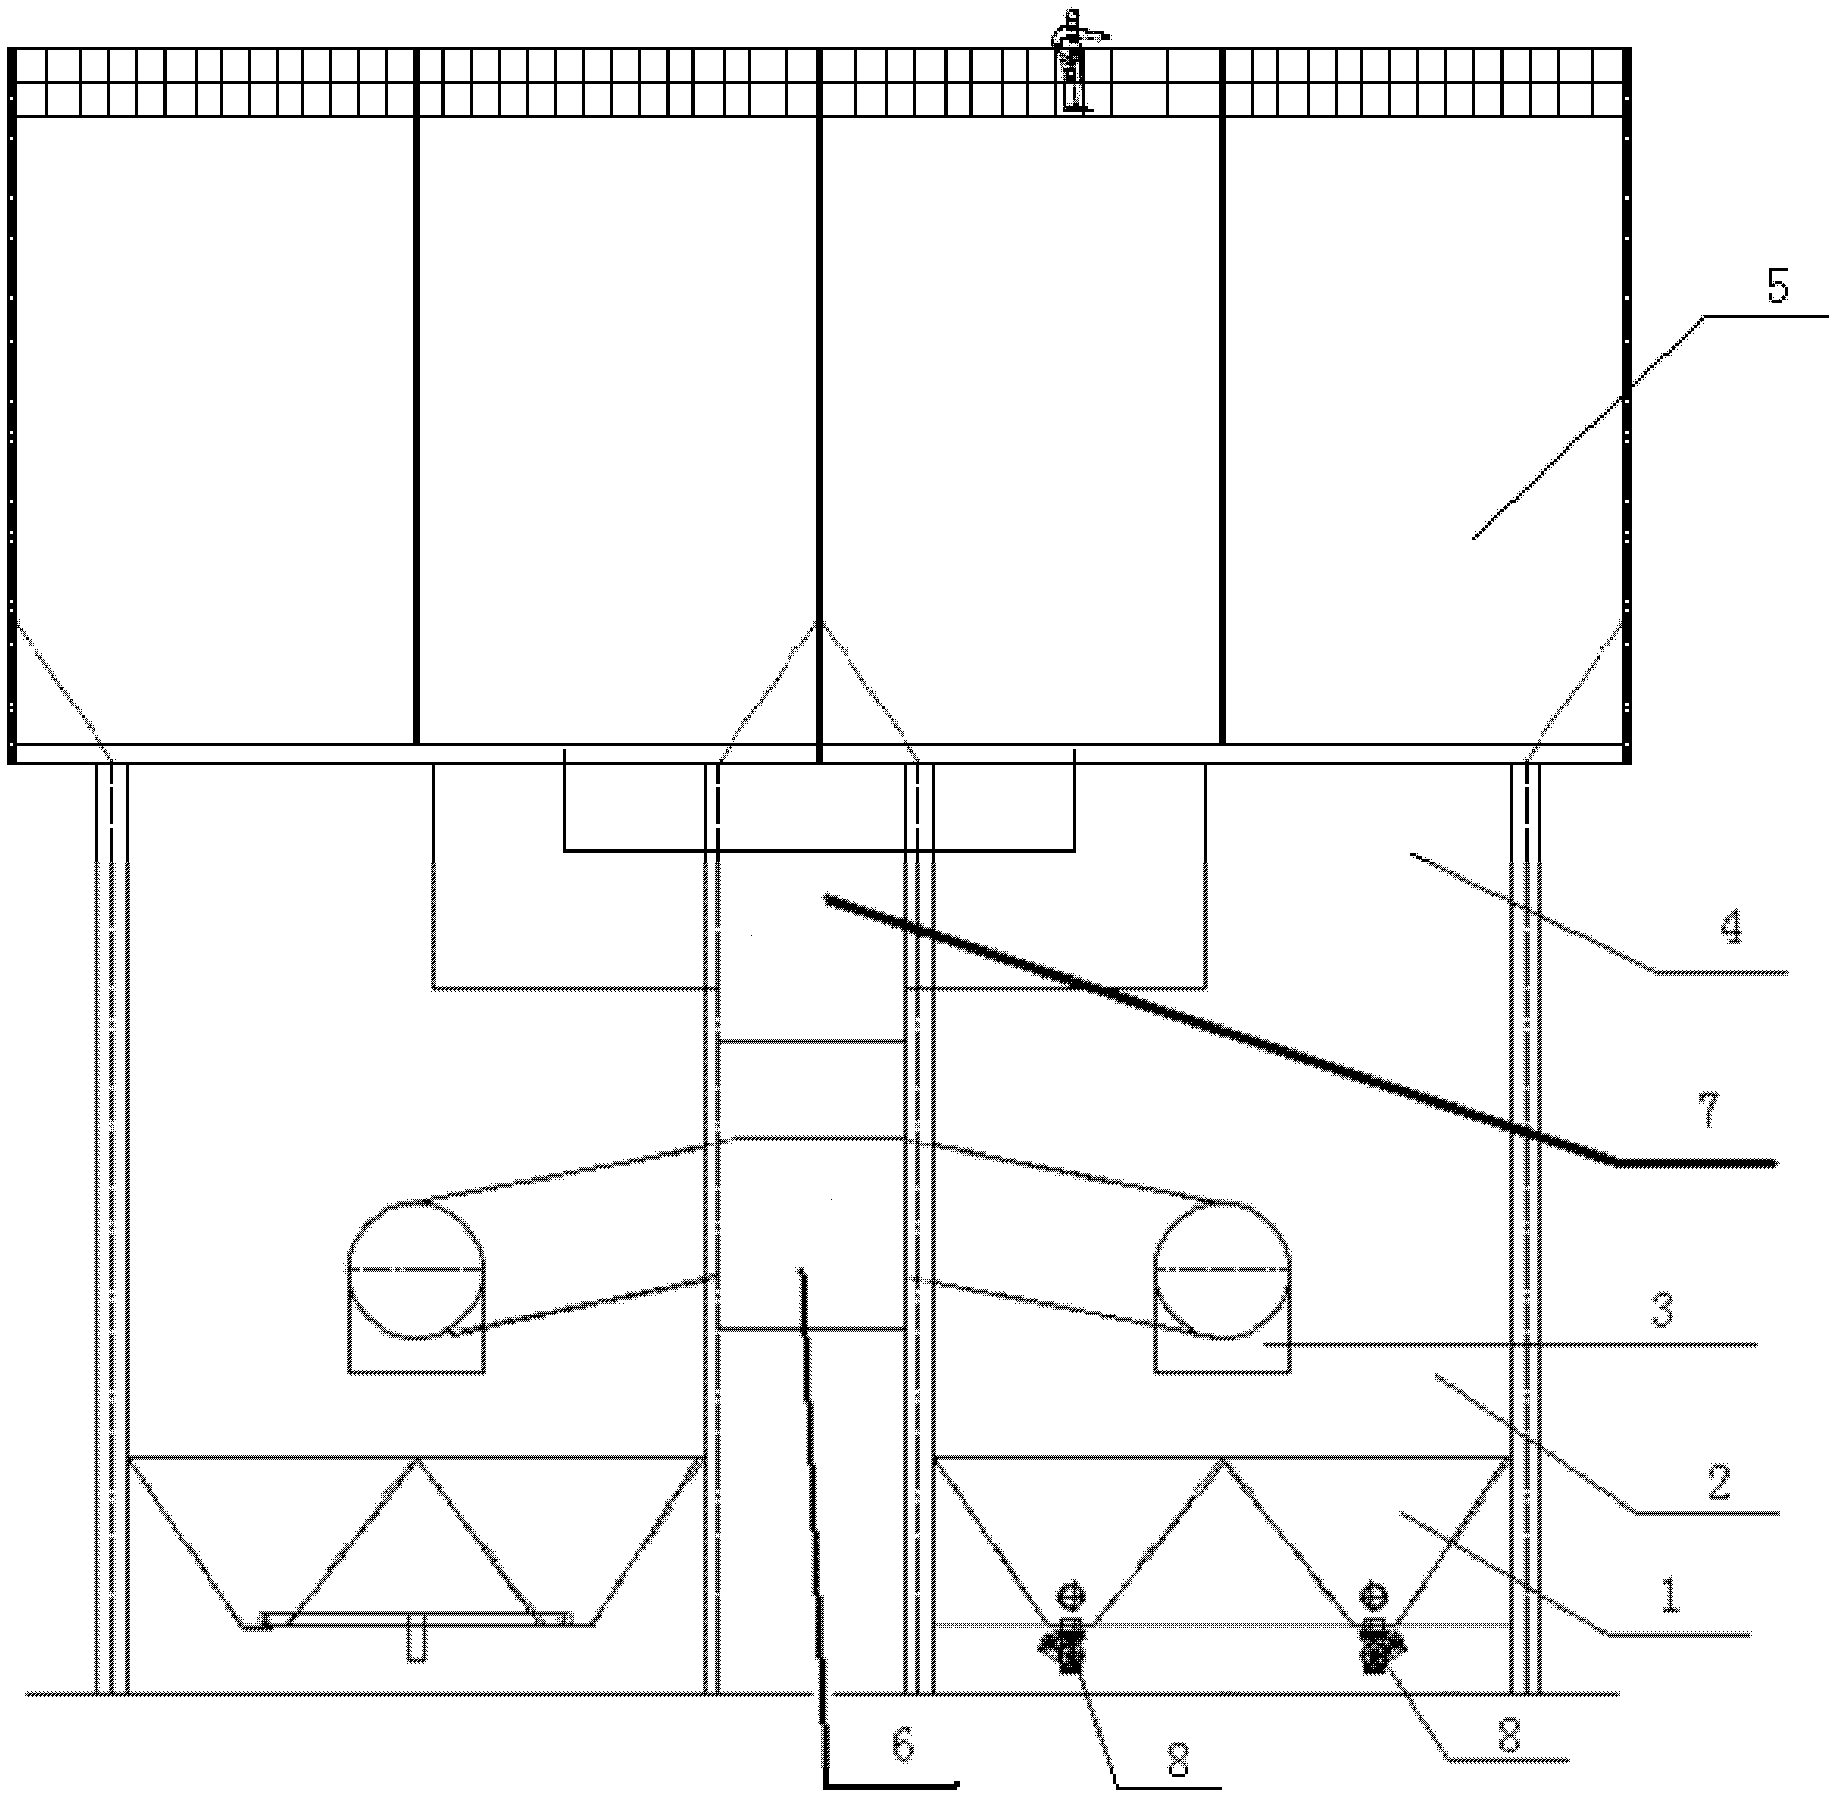 Semidry process fume desulfurizing and dedusting integrated device used for SO2